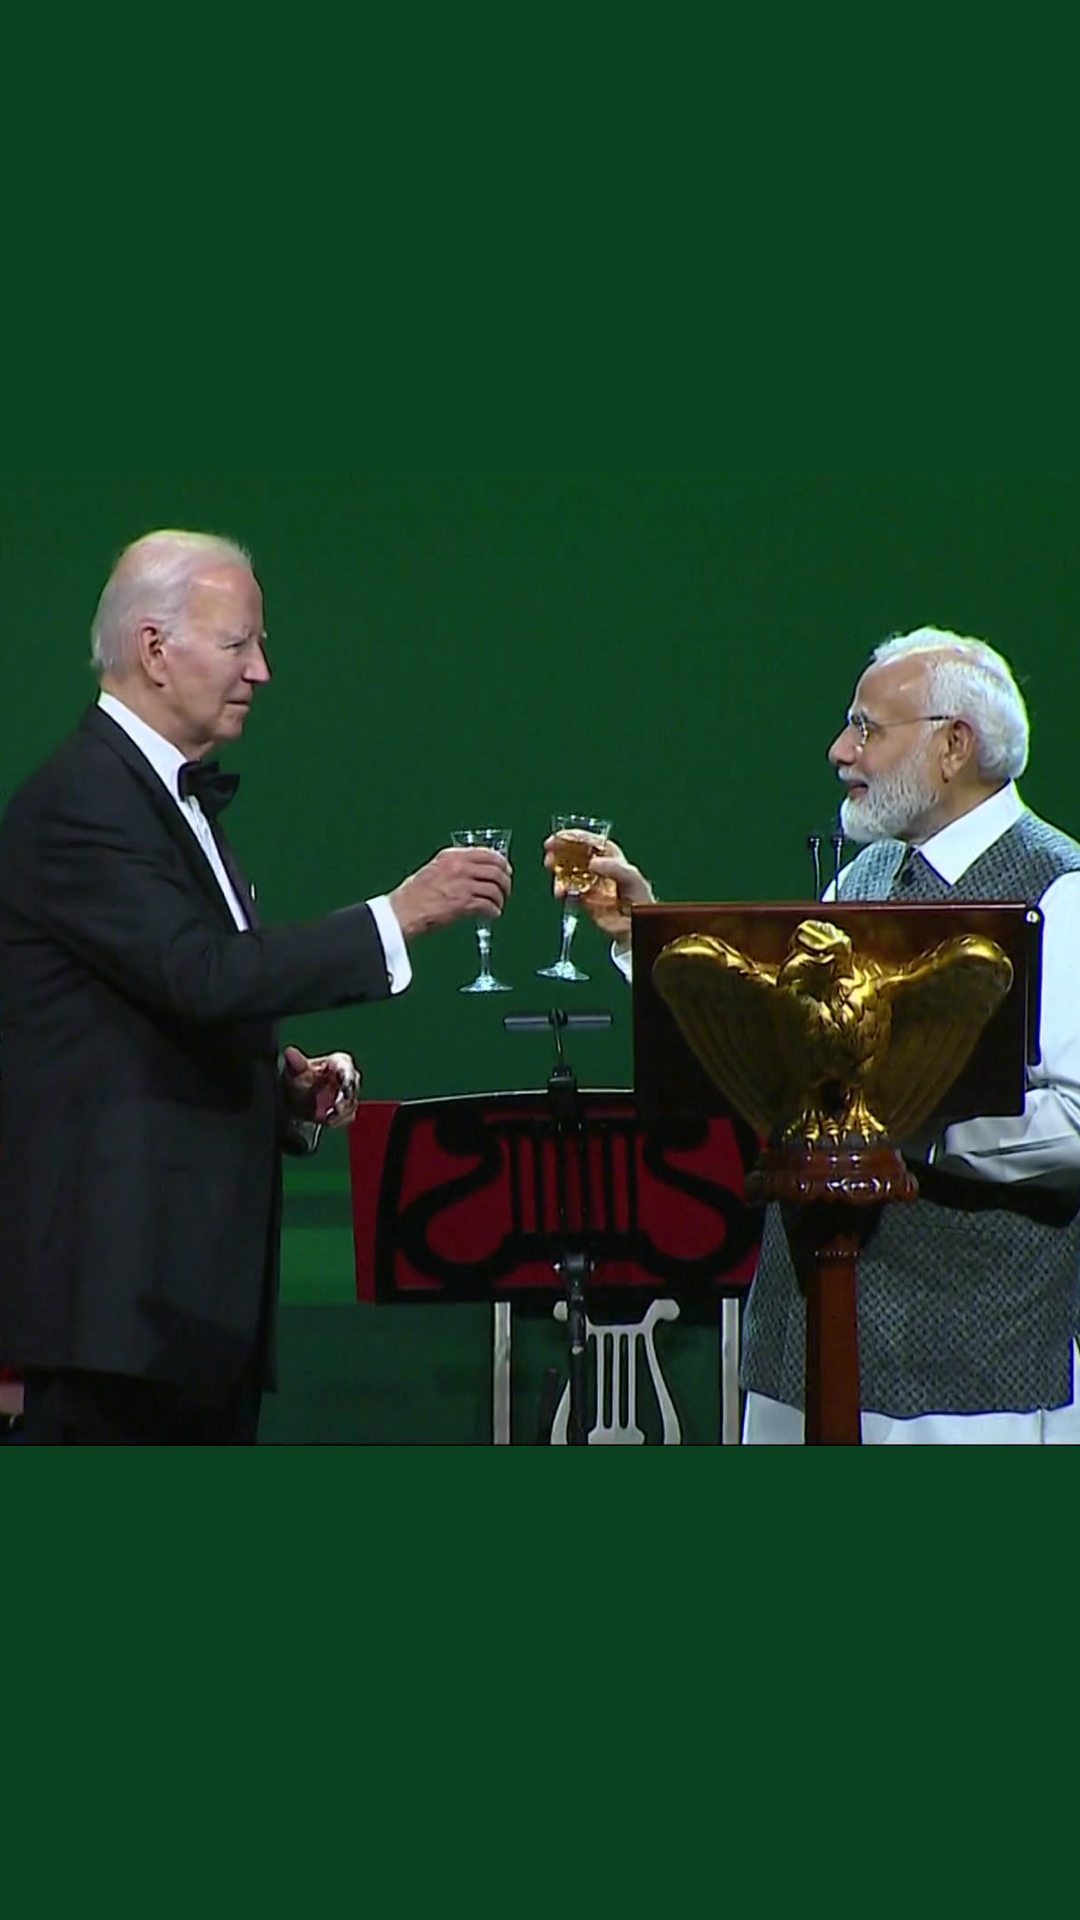 PM Modi offers a toast during State Dinner with President Joe Biden at the White House in Washington
